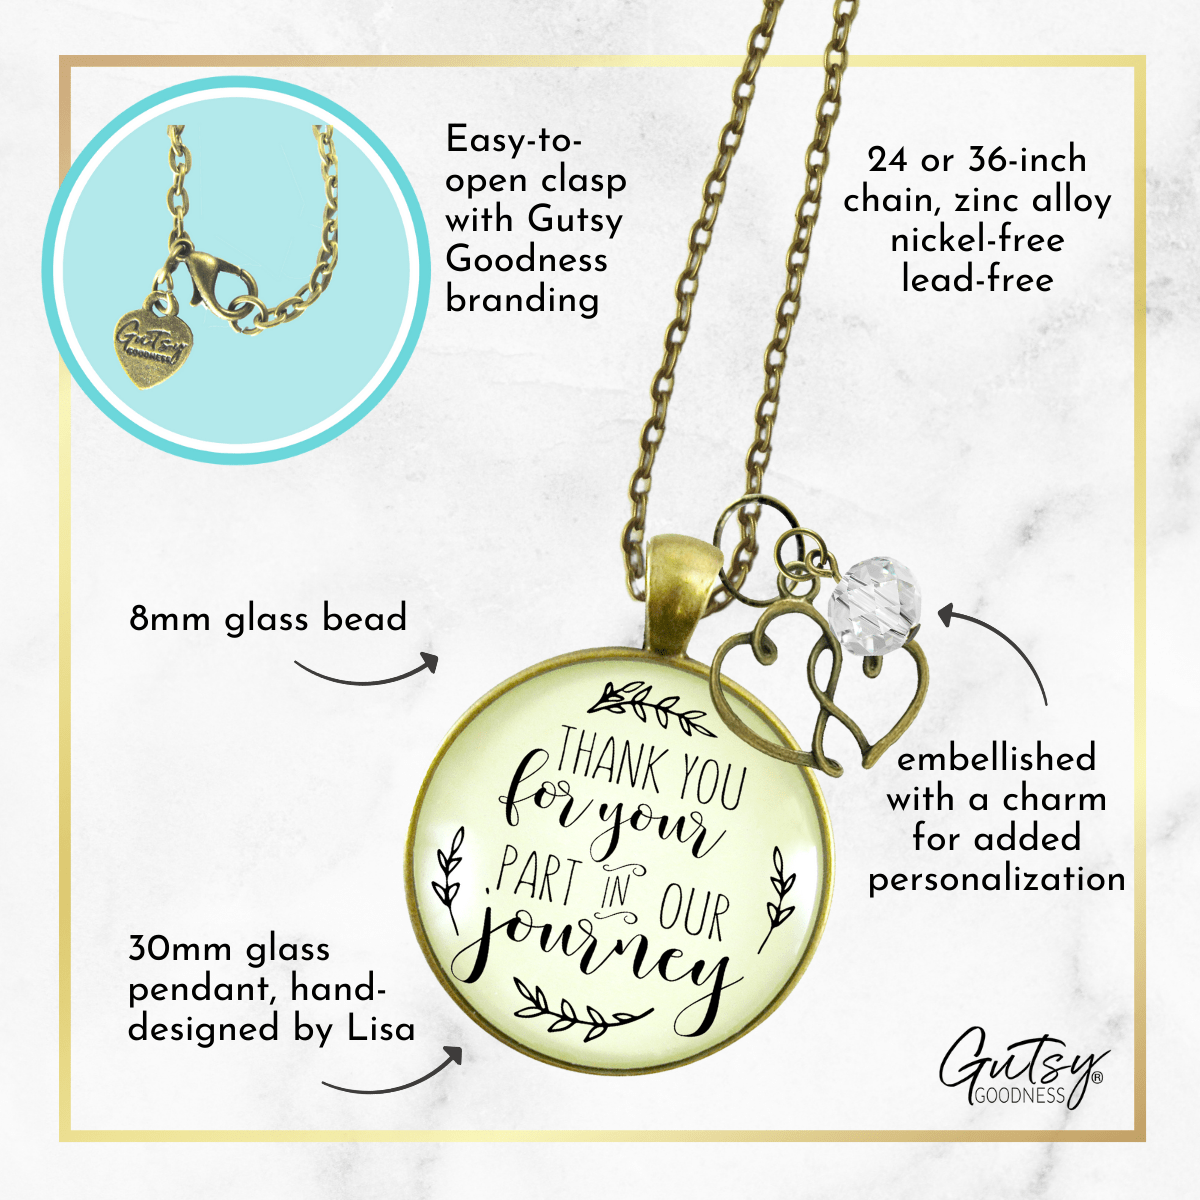 Gutsy Goodness Wedding Officiant Gift Necklace Thank You for Your Part Heart Charm - Gutsy Goodness Handmade Jewelry;Wedding Officiant Gift Necklace Thank You For Your Part Heart Charm - Gutsy Goodness Handmade Jewelry Gifts